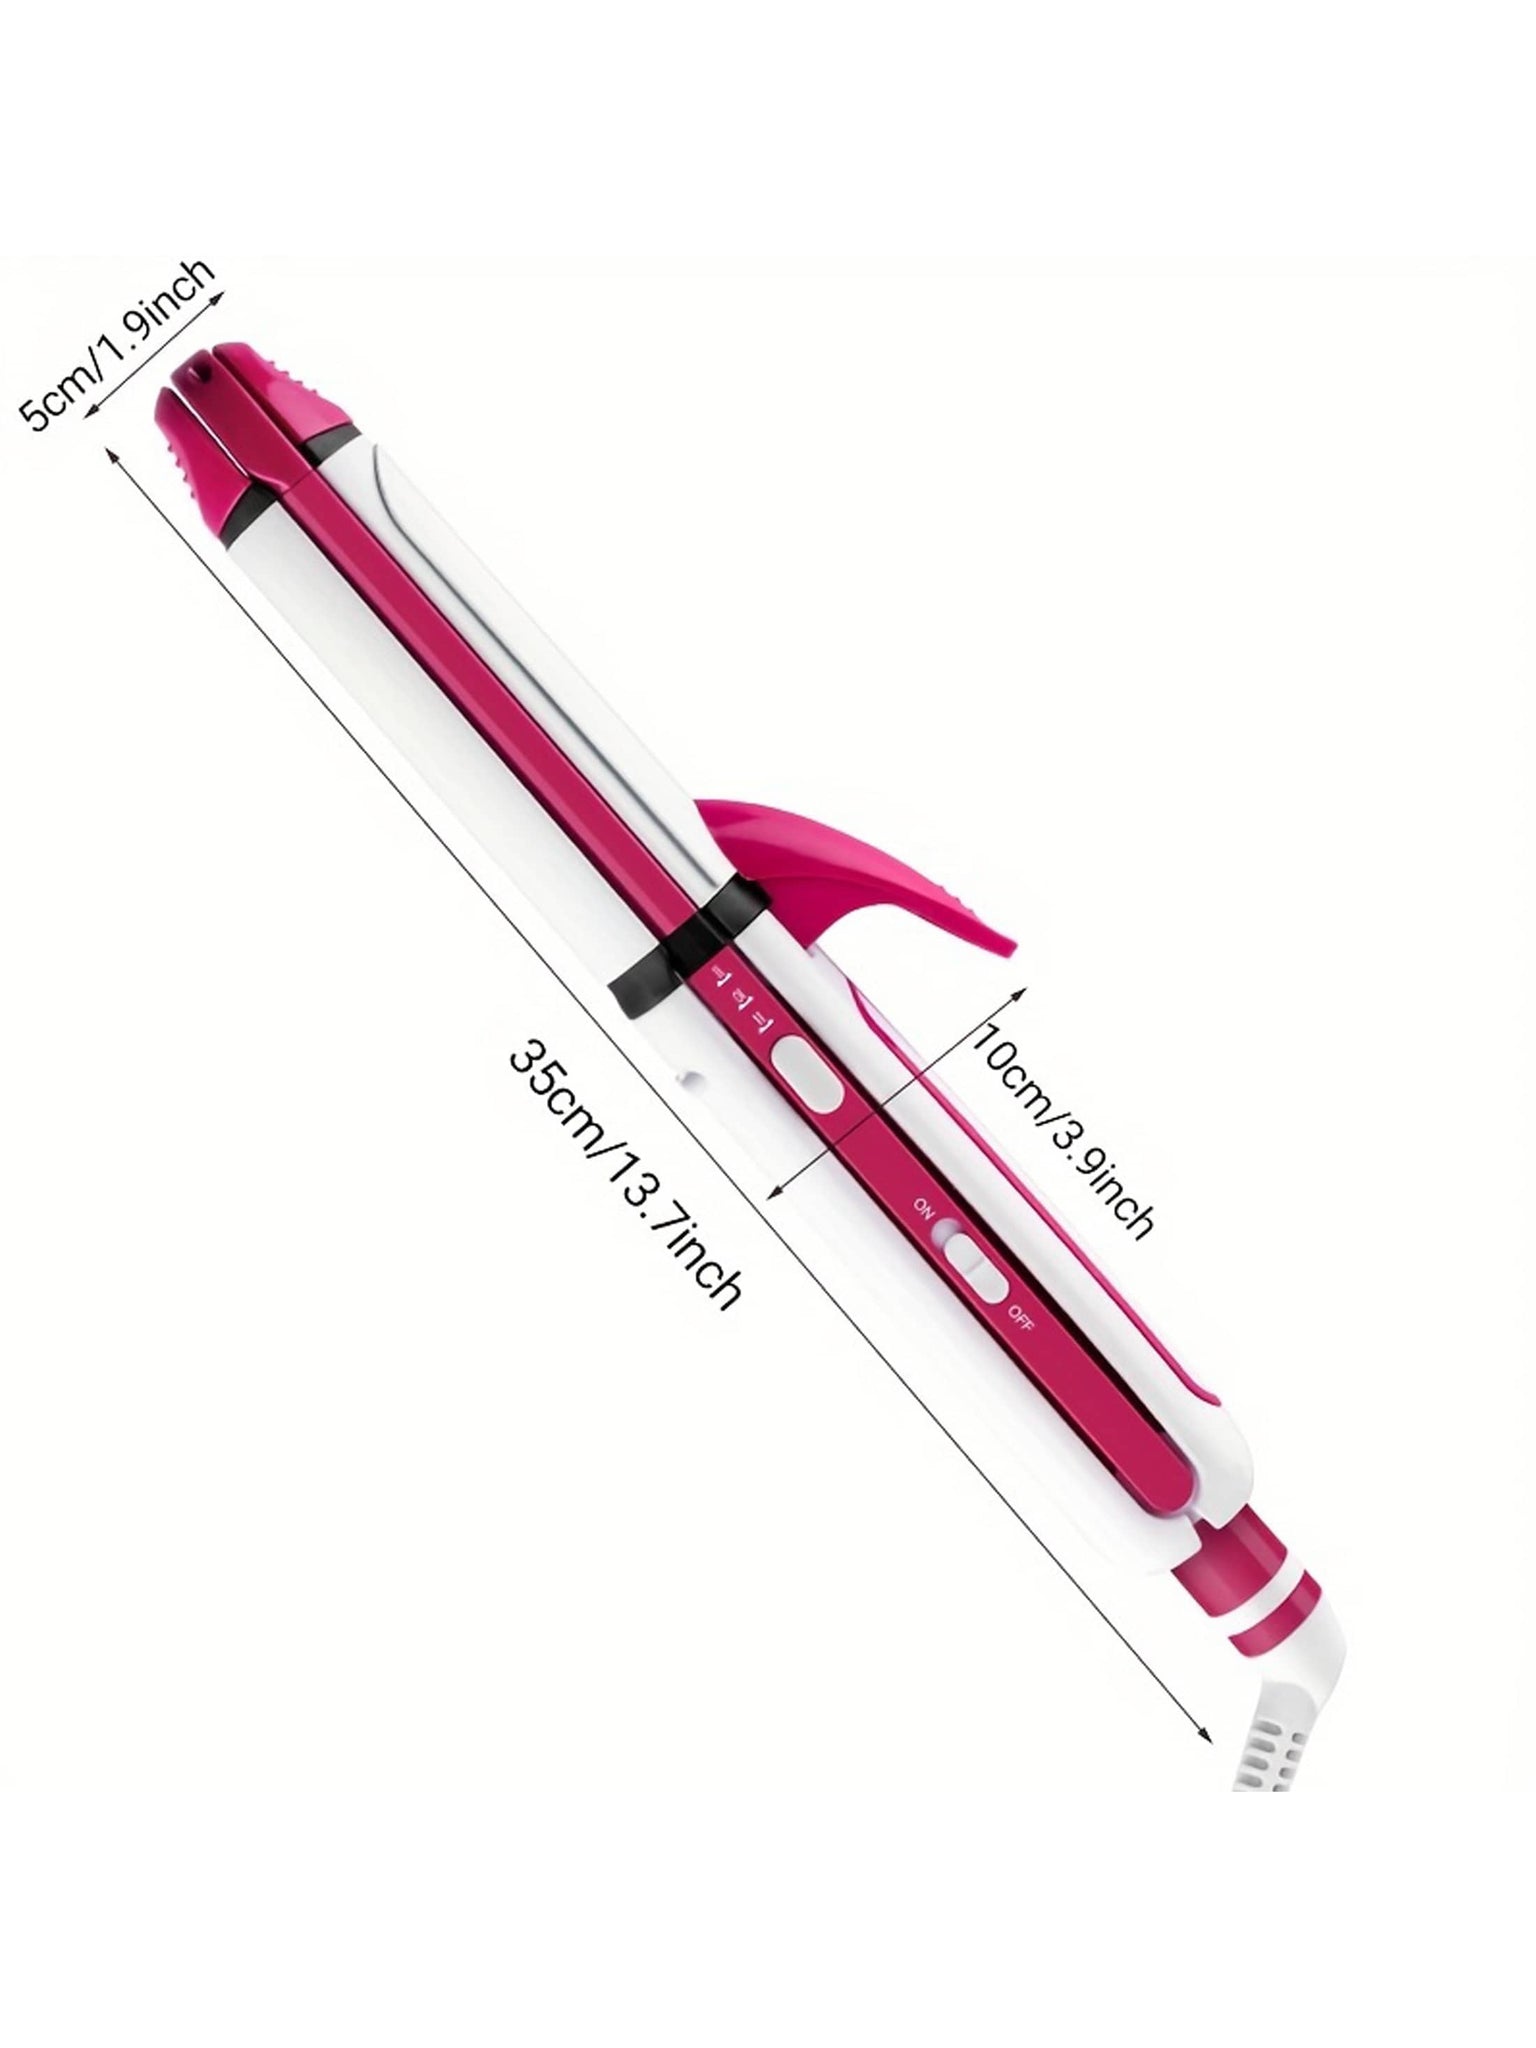 3-in-1 Ceramic Hair Curling Iron: Straighten, Crimp & Style Your Hair Instantly!-Hot Pink-4